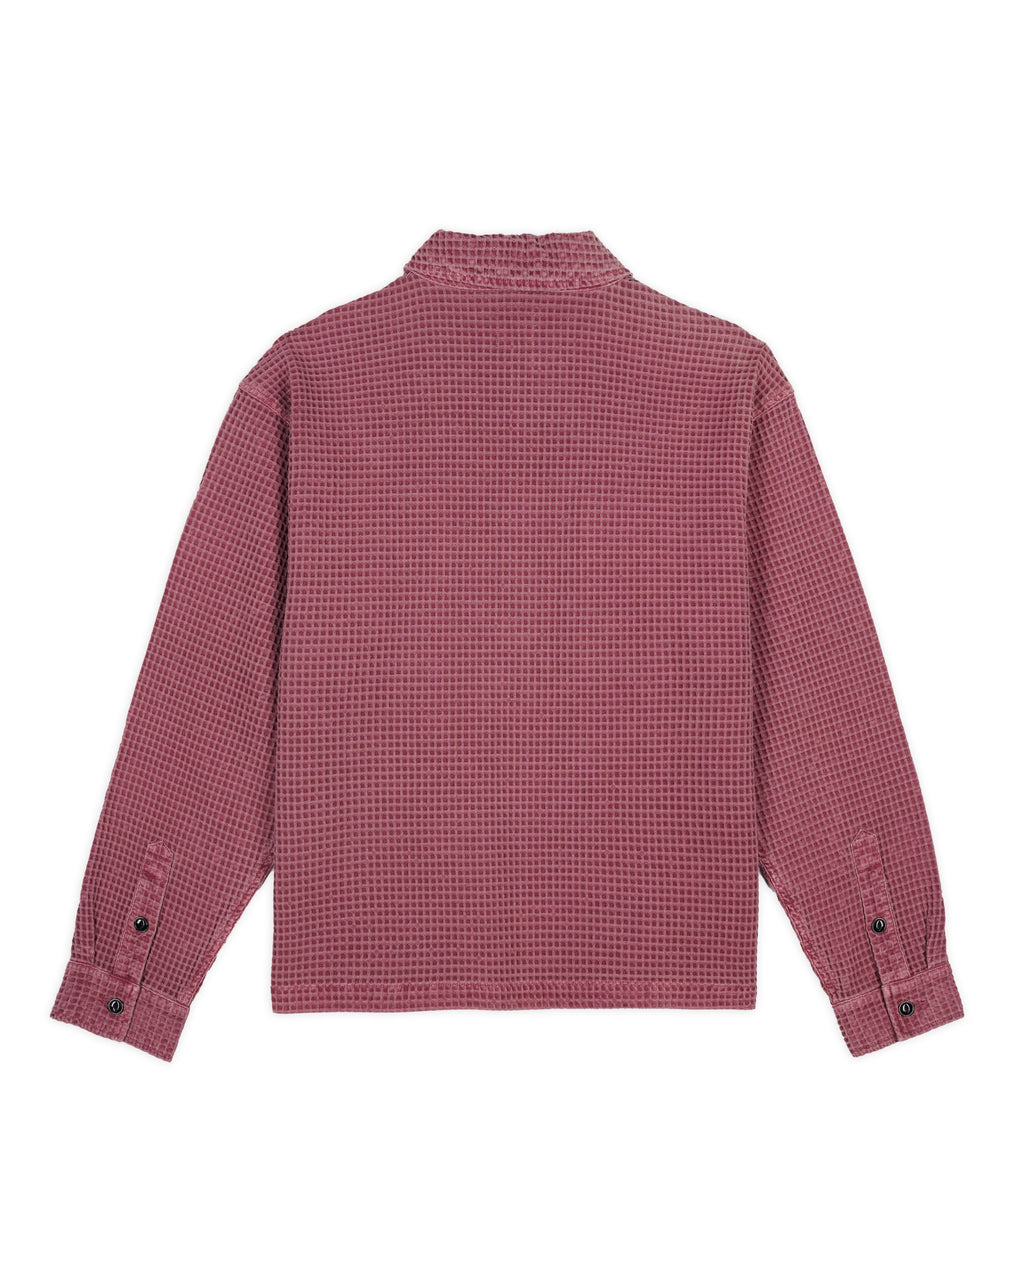 Waffle Button Front Shirt, Berry